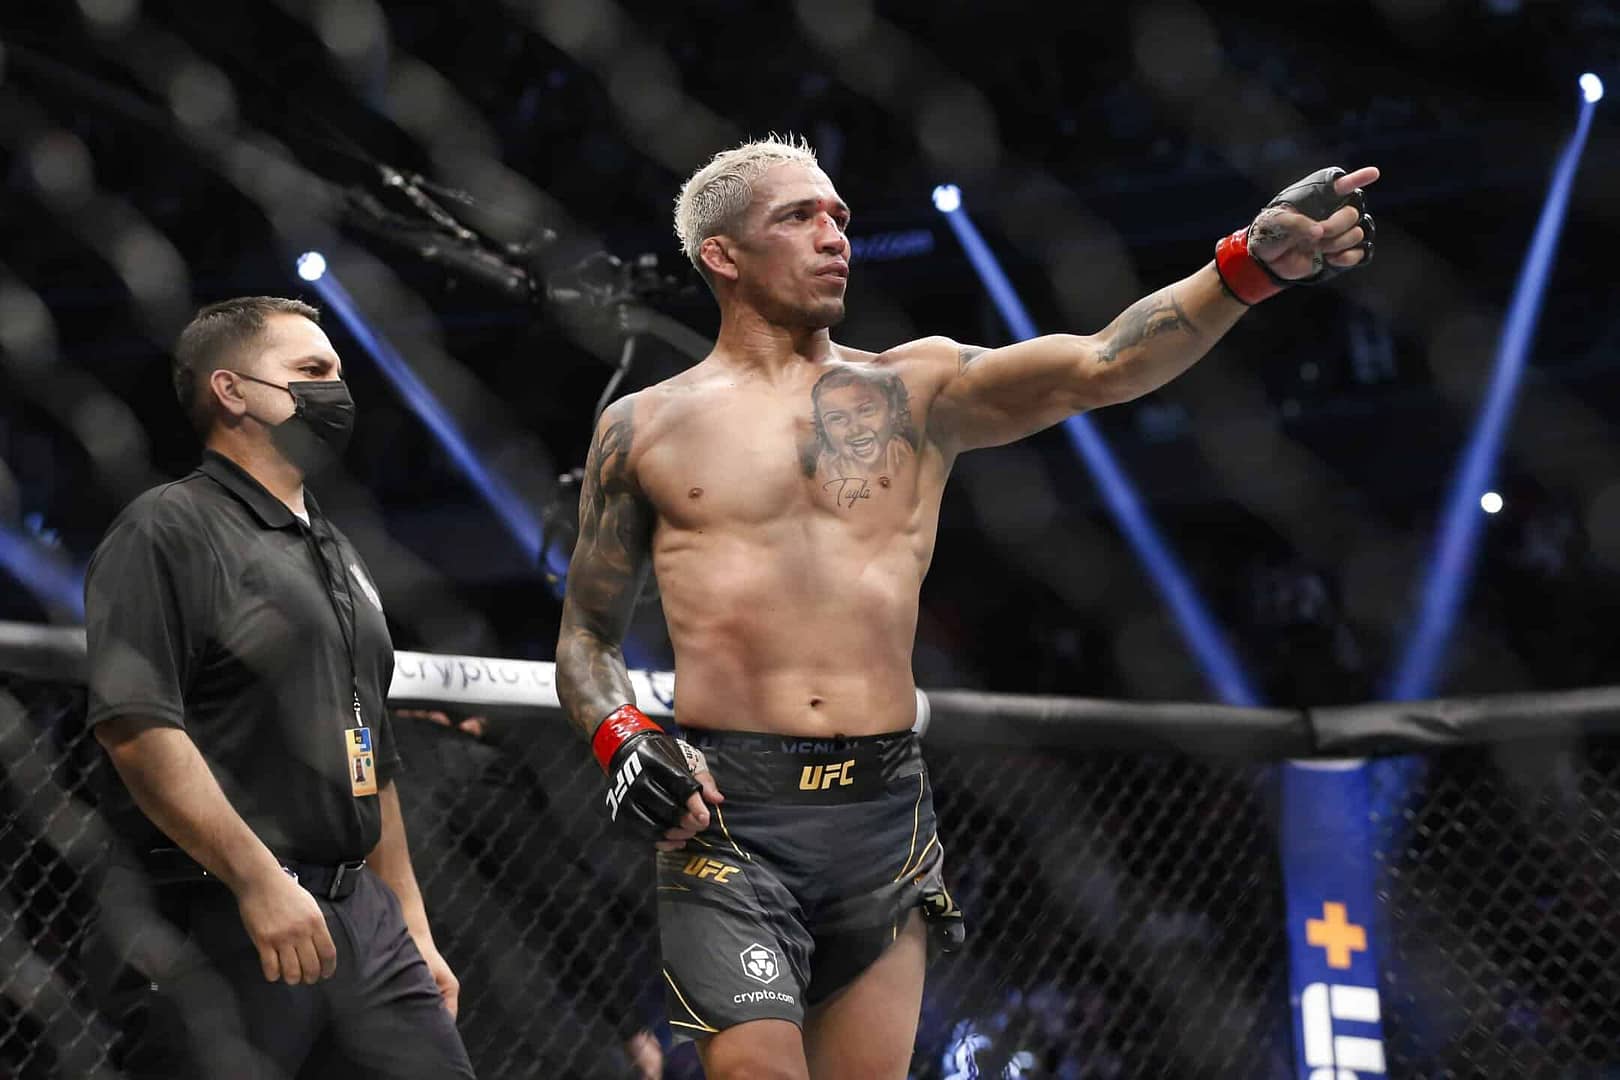 With a big day ahead, let's get to our Charles Oliveira-Arman Tsarukyan pick, odds and preview. Be sure to check out the rest of our UFC...